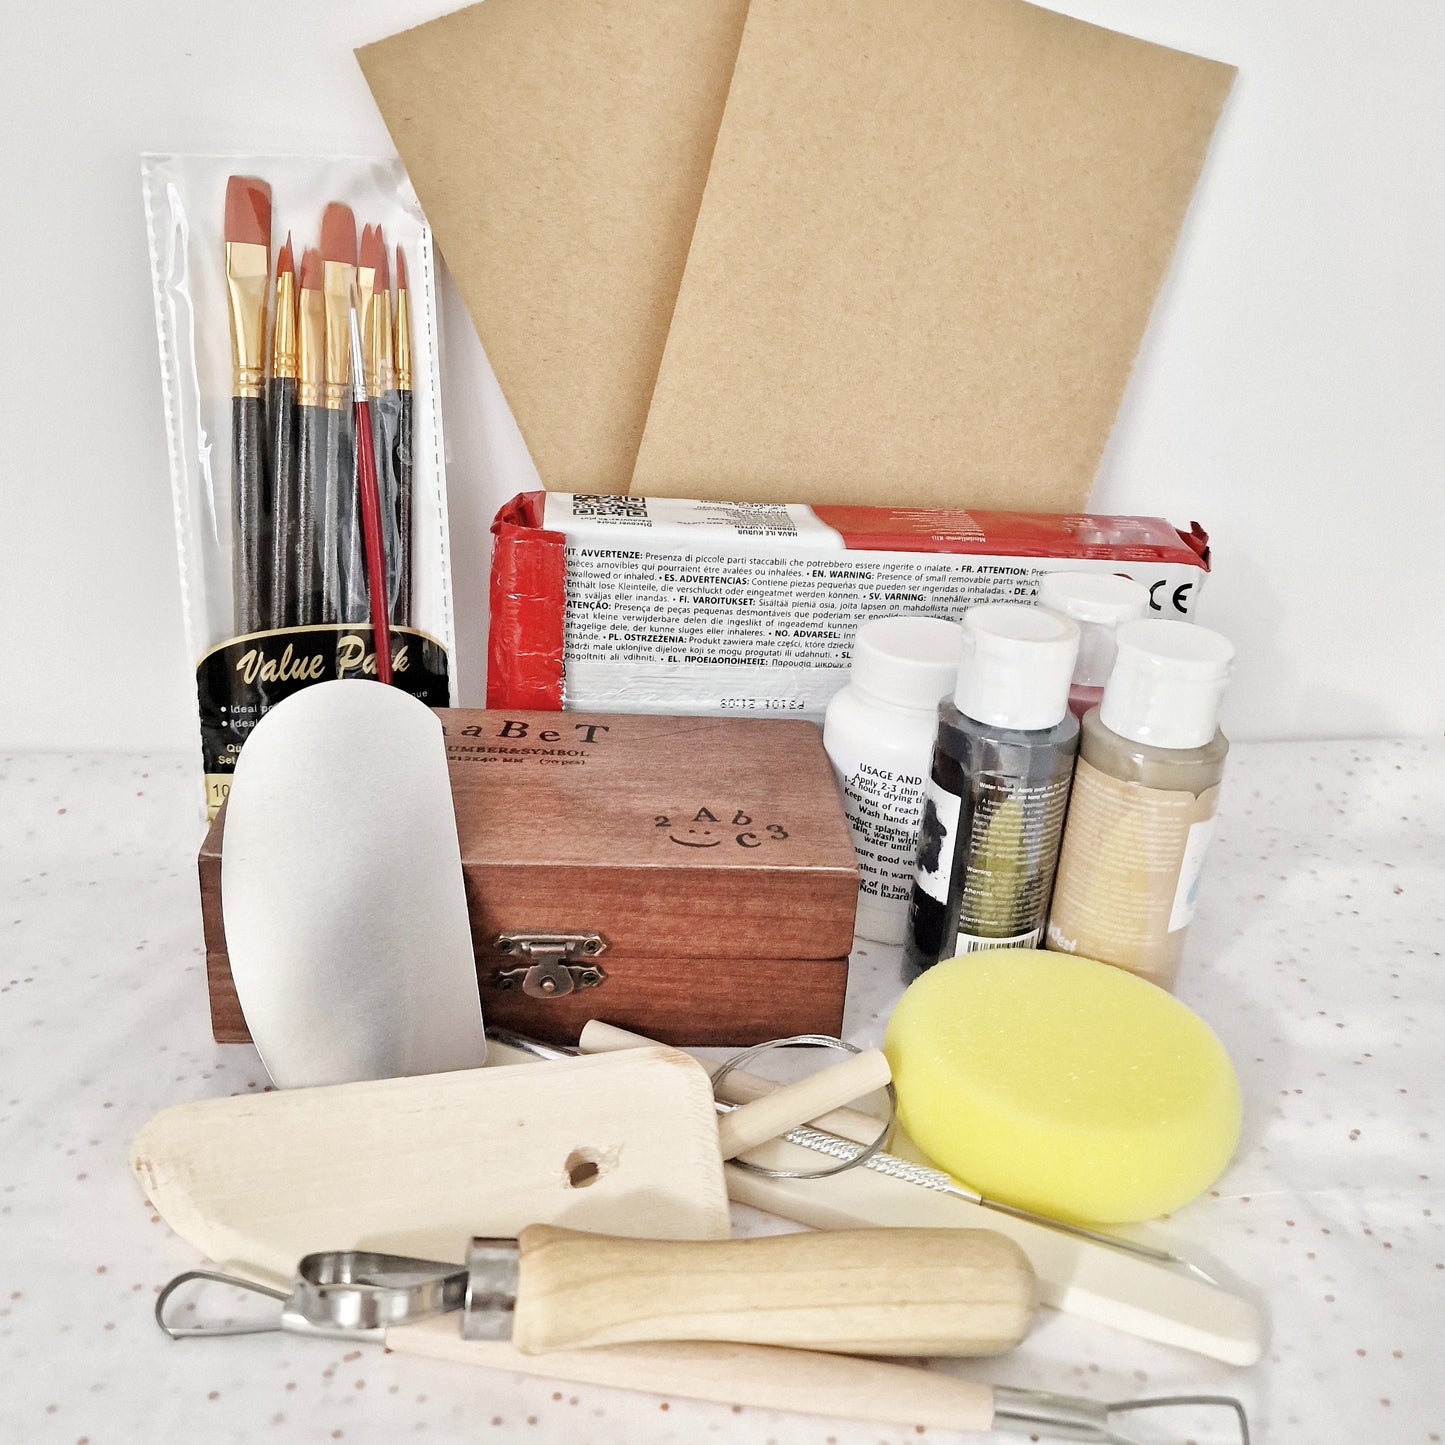 Everything you need, clay starter kit